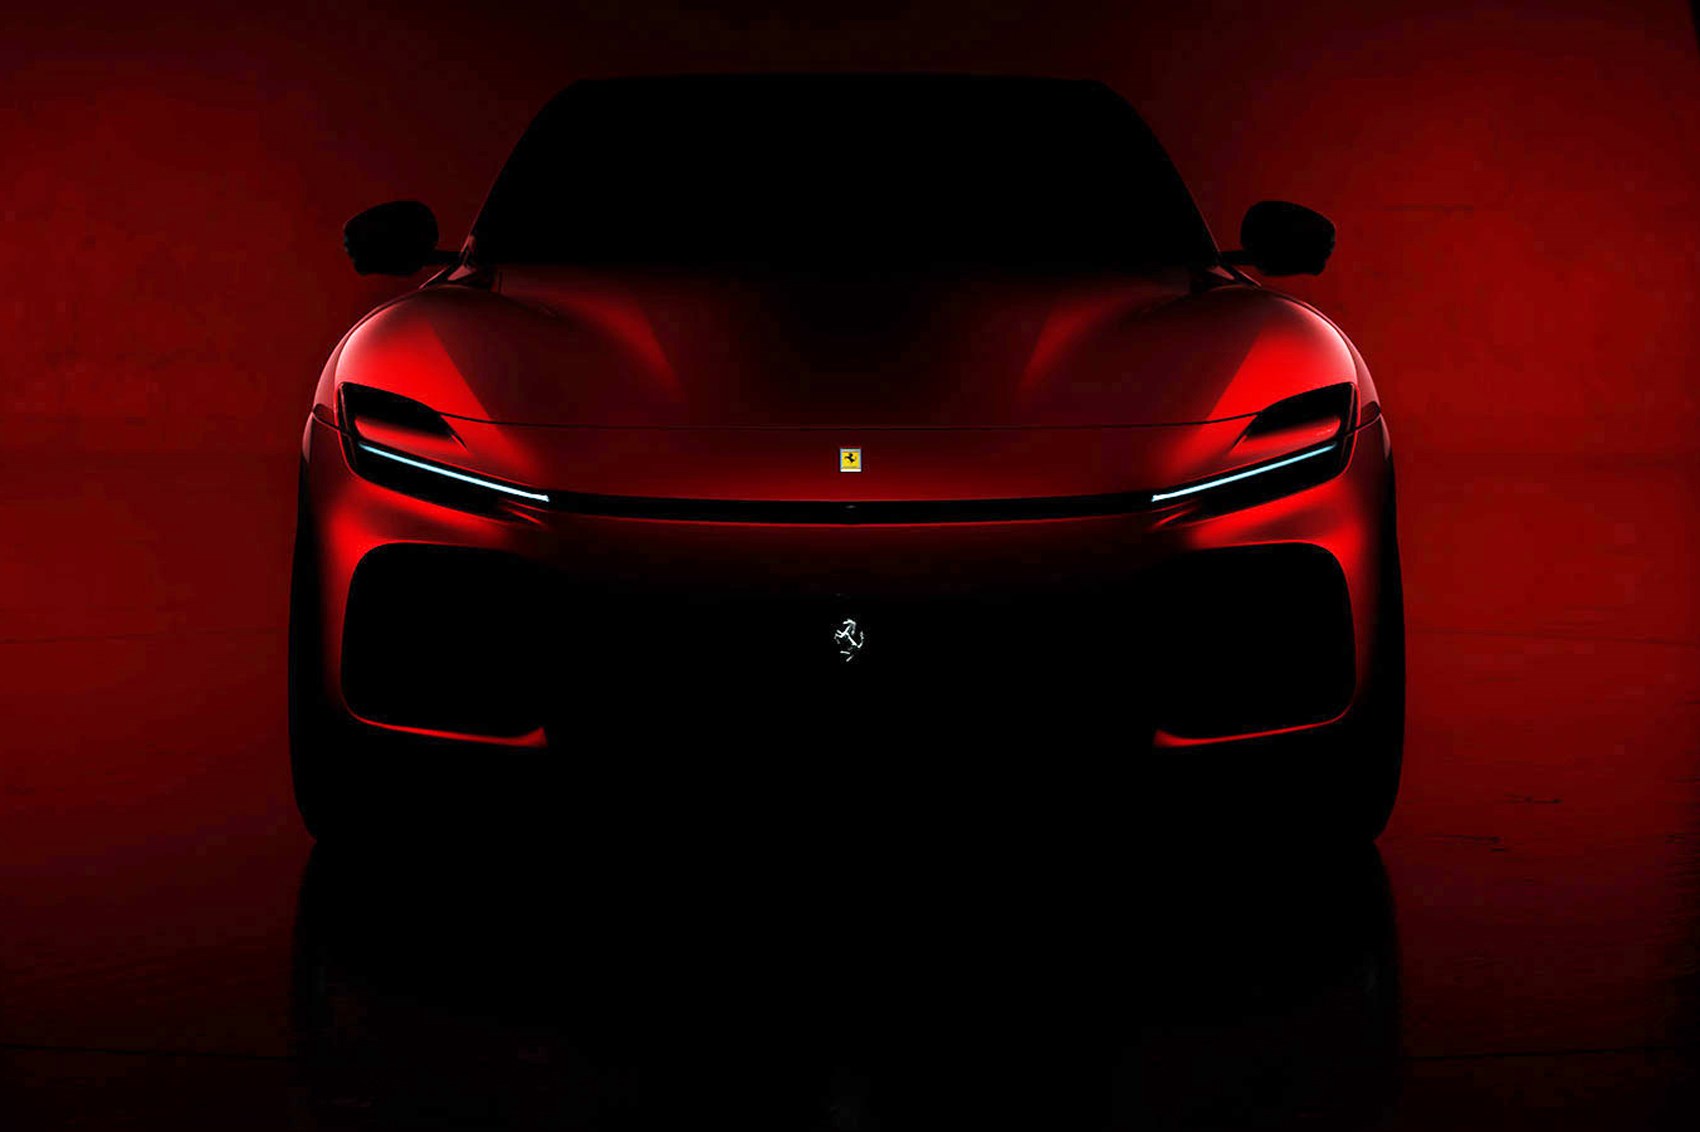 Ferrari Purosangue to arrive in September with V12 power and